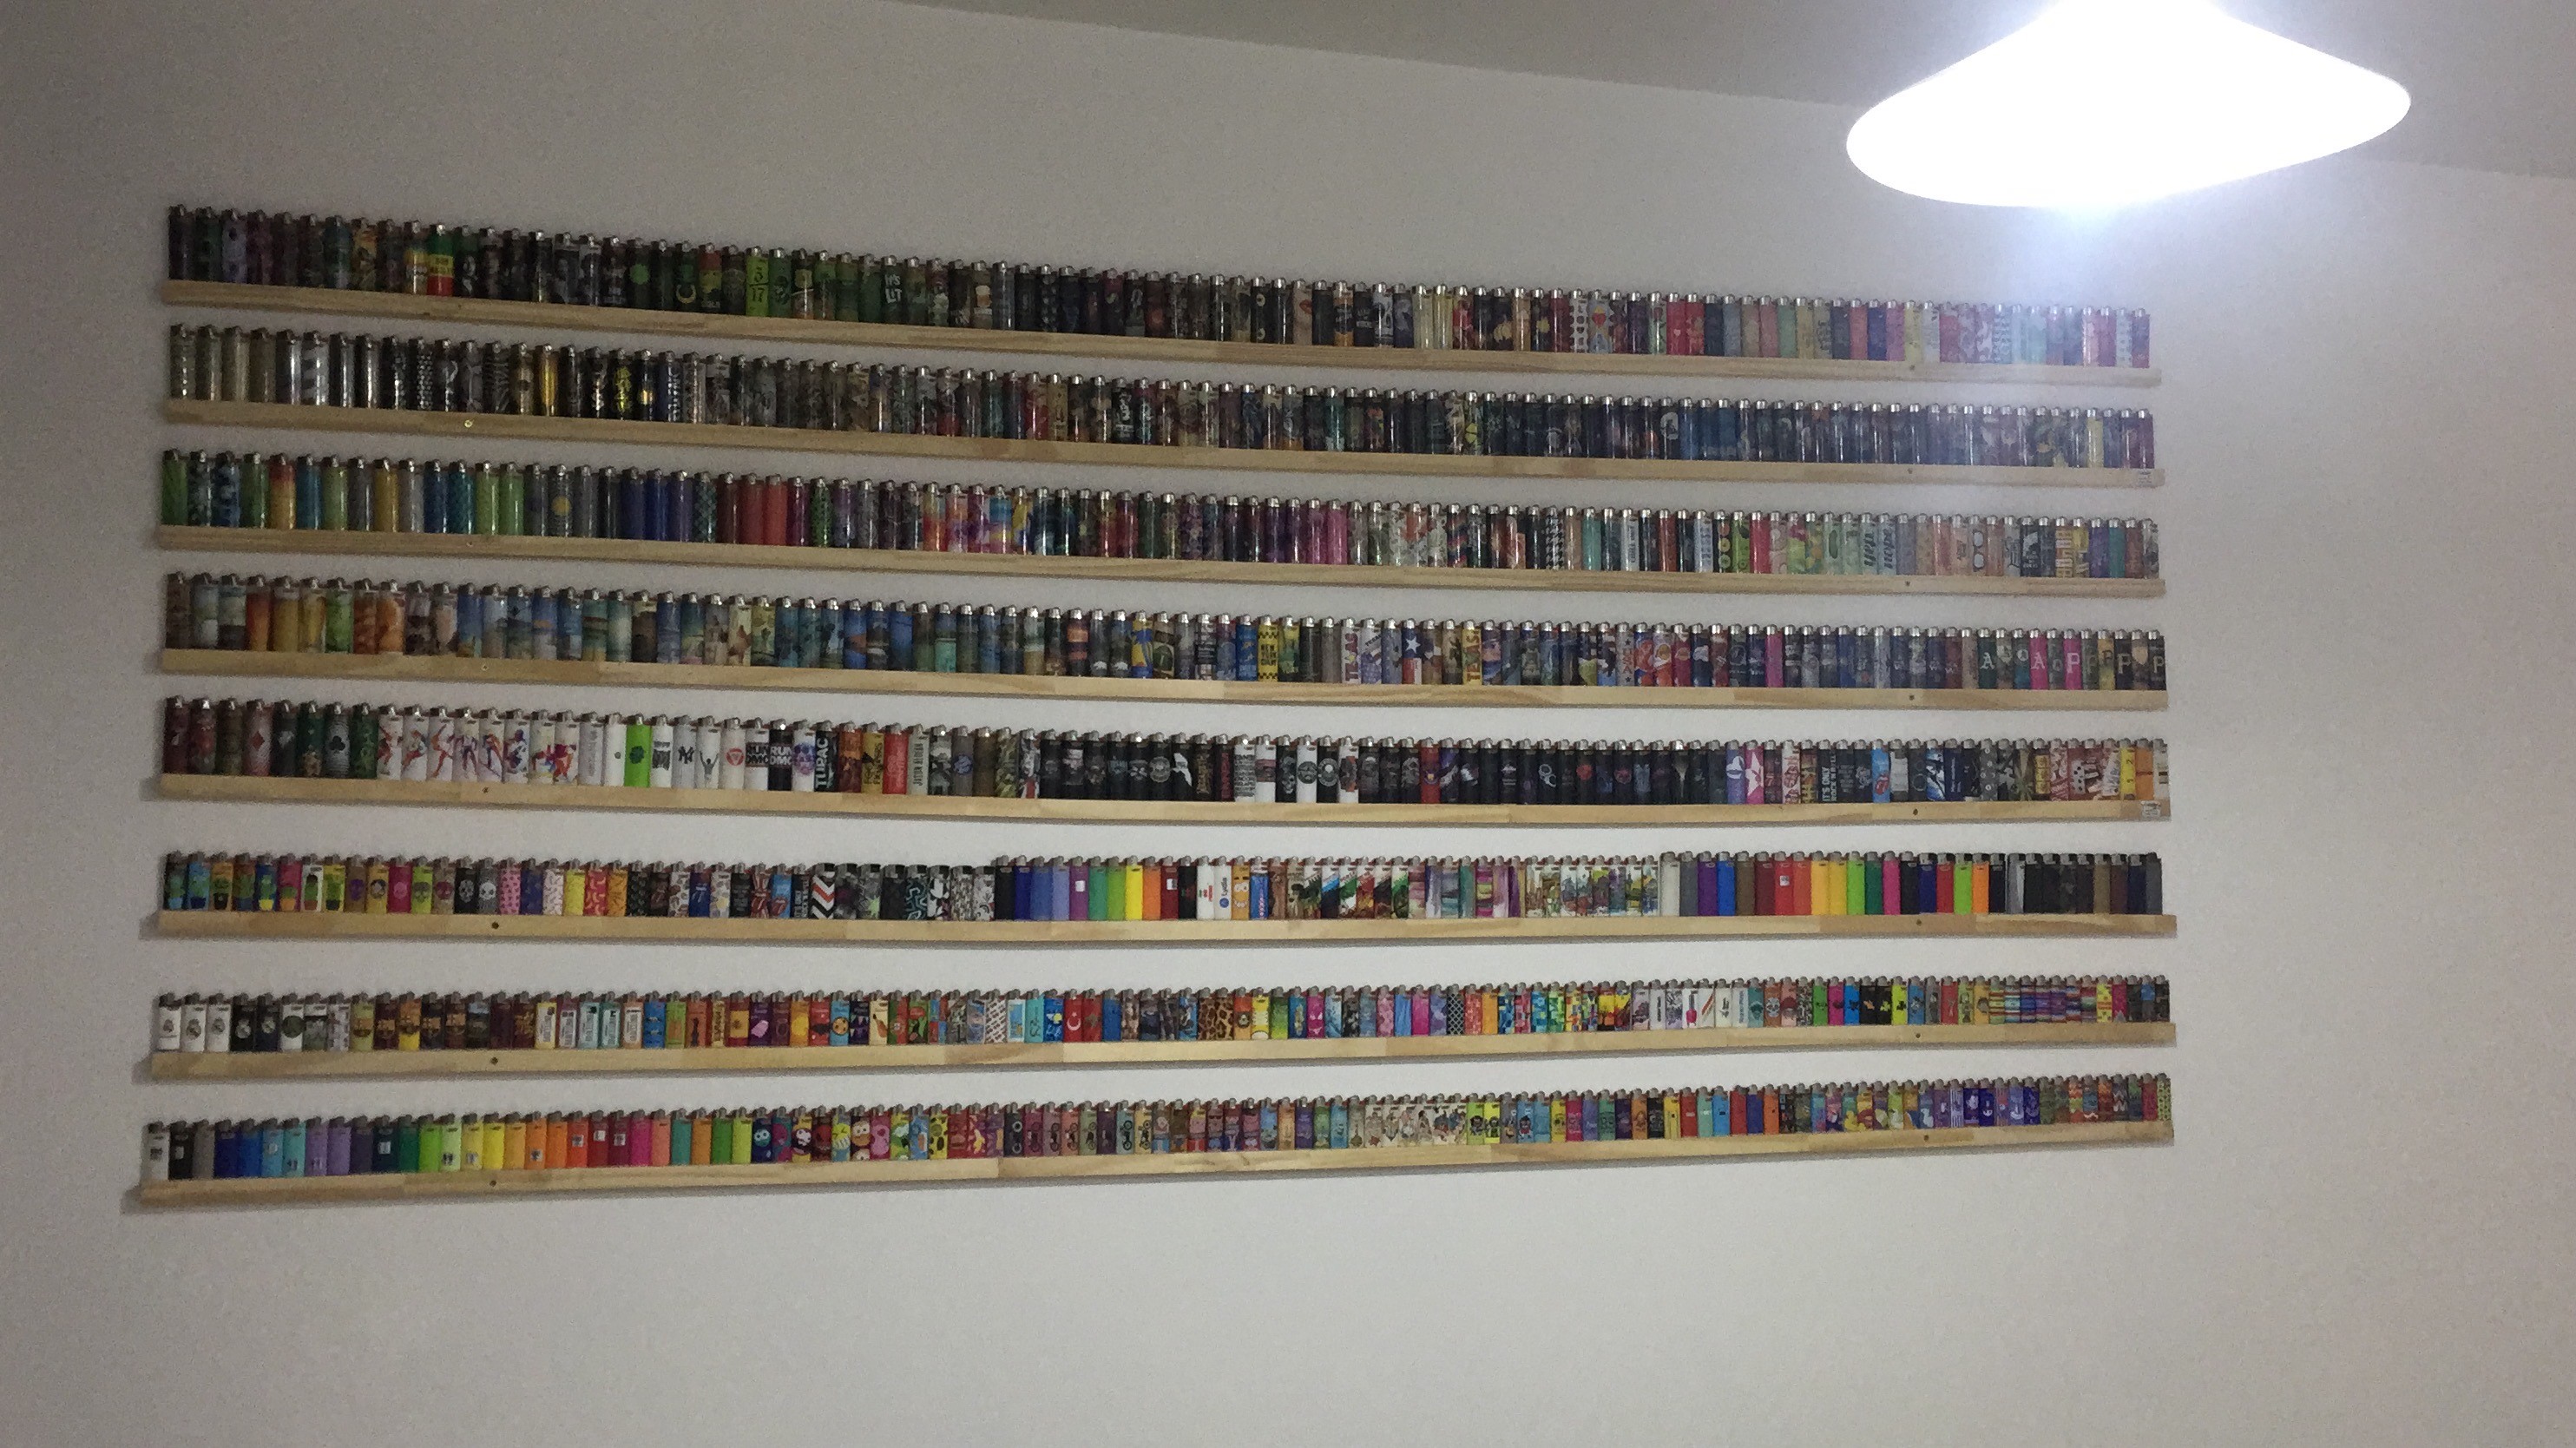 blik opretholde akavet BIC on Twitter: "Is this the largest personal collection of #BIClighters in  the world? Federico de Sousa, a resident of Argentina, began his collection  15 years ago and now owns more than